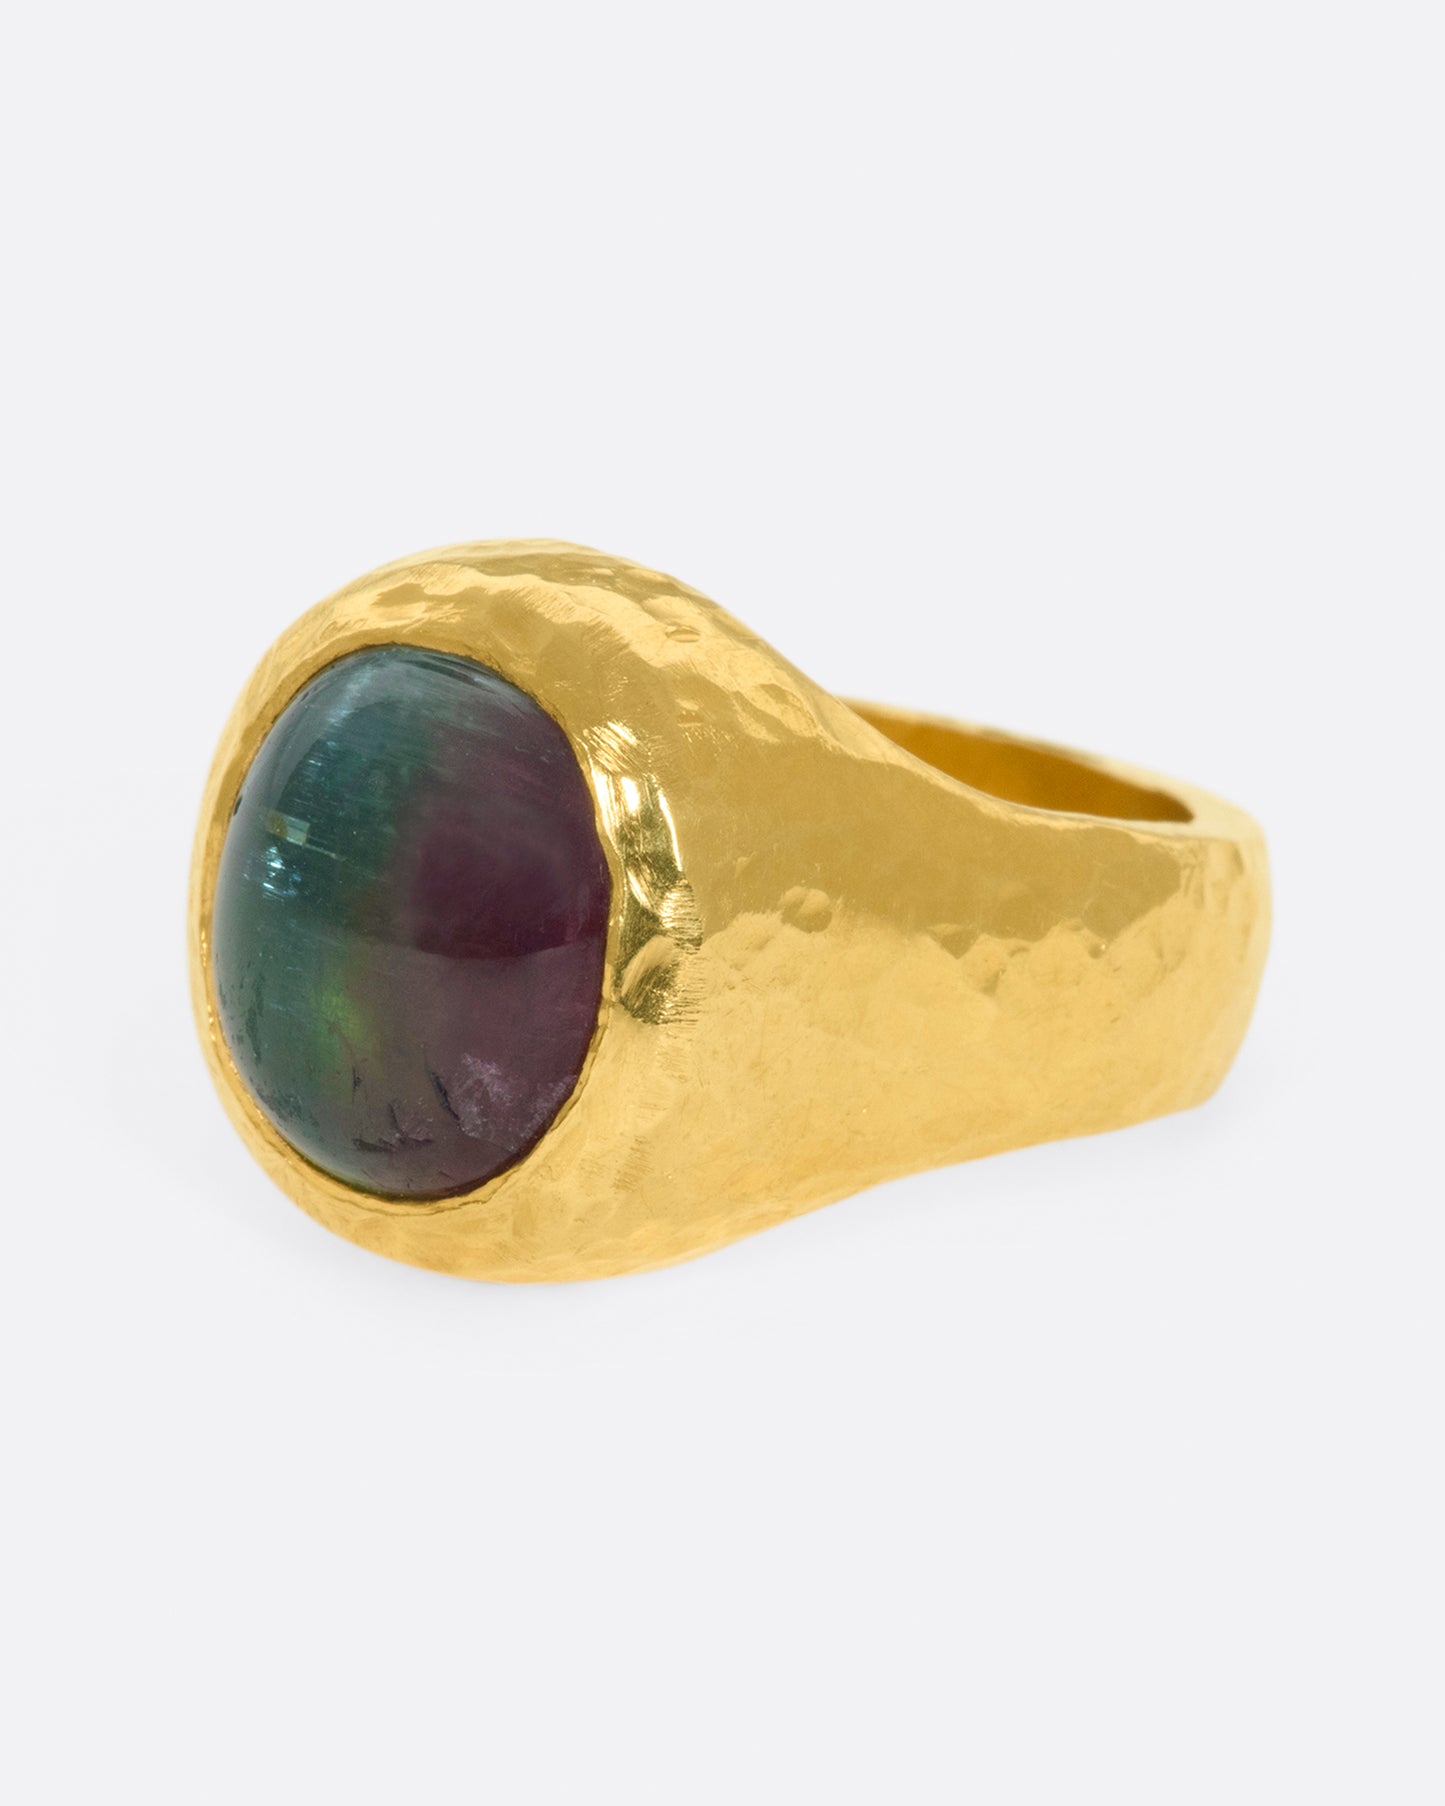 A bicolor pink and green tourmaline sits at the center of this heavy, hammered, high karat gold ring.